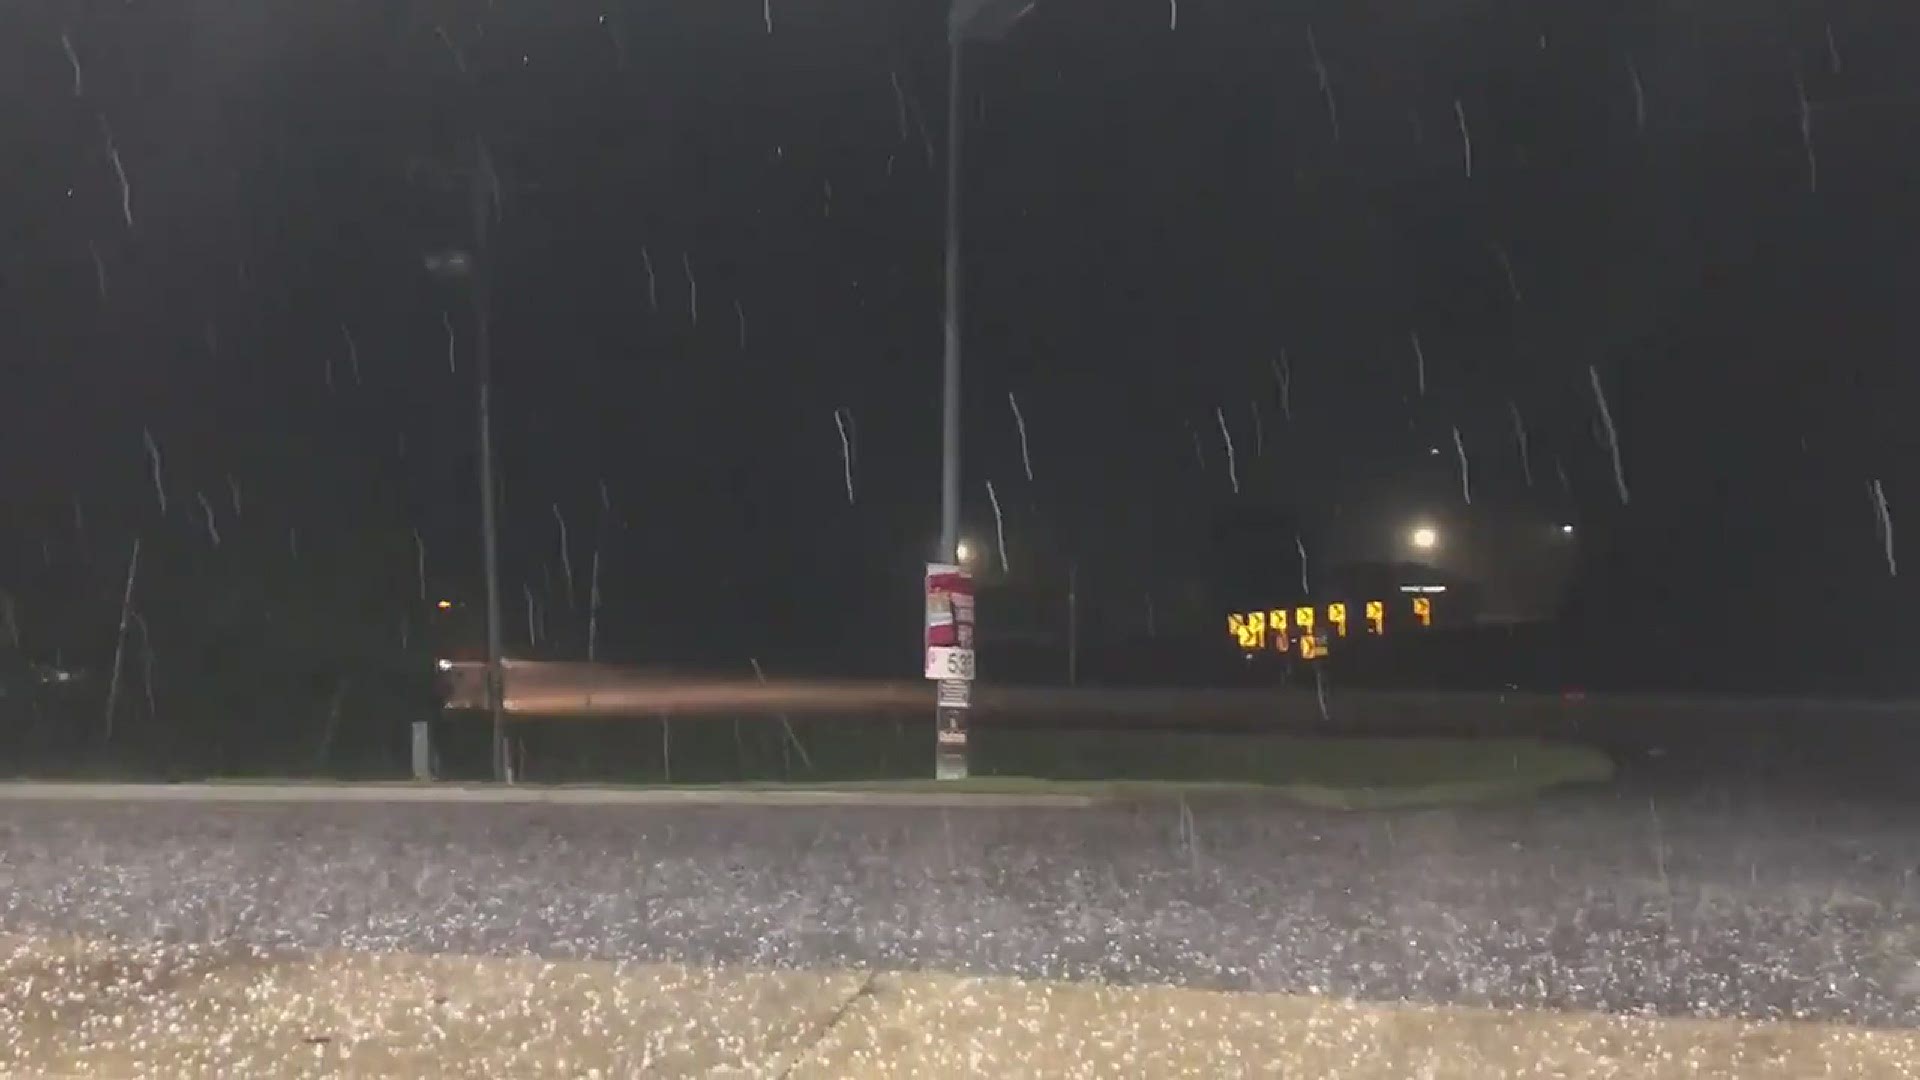 Hail falls in Grover in Cleveland County, North Carolina as severe weather rolled through Saturday evening.